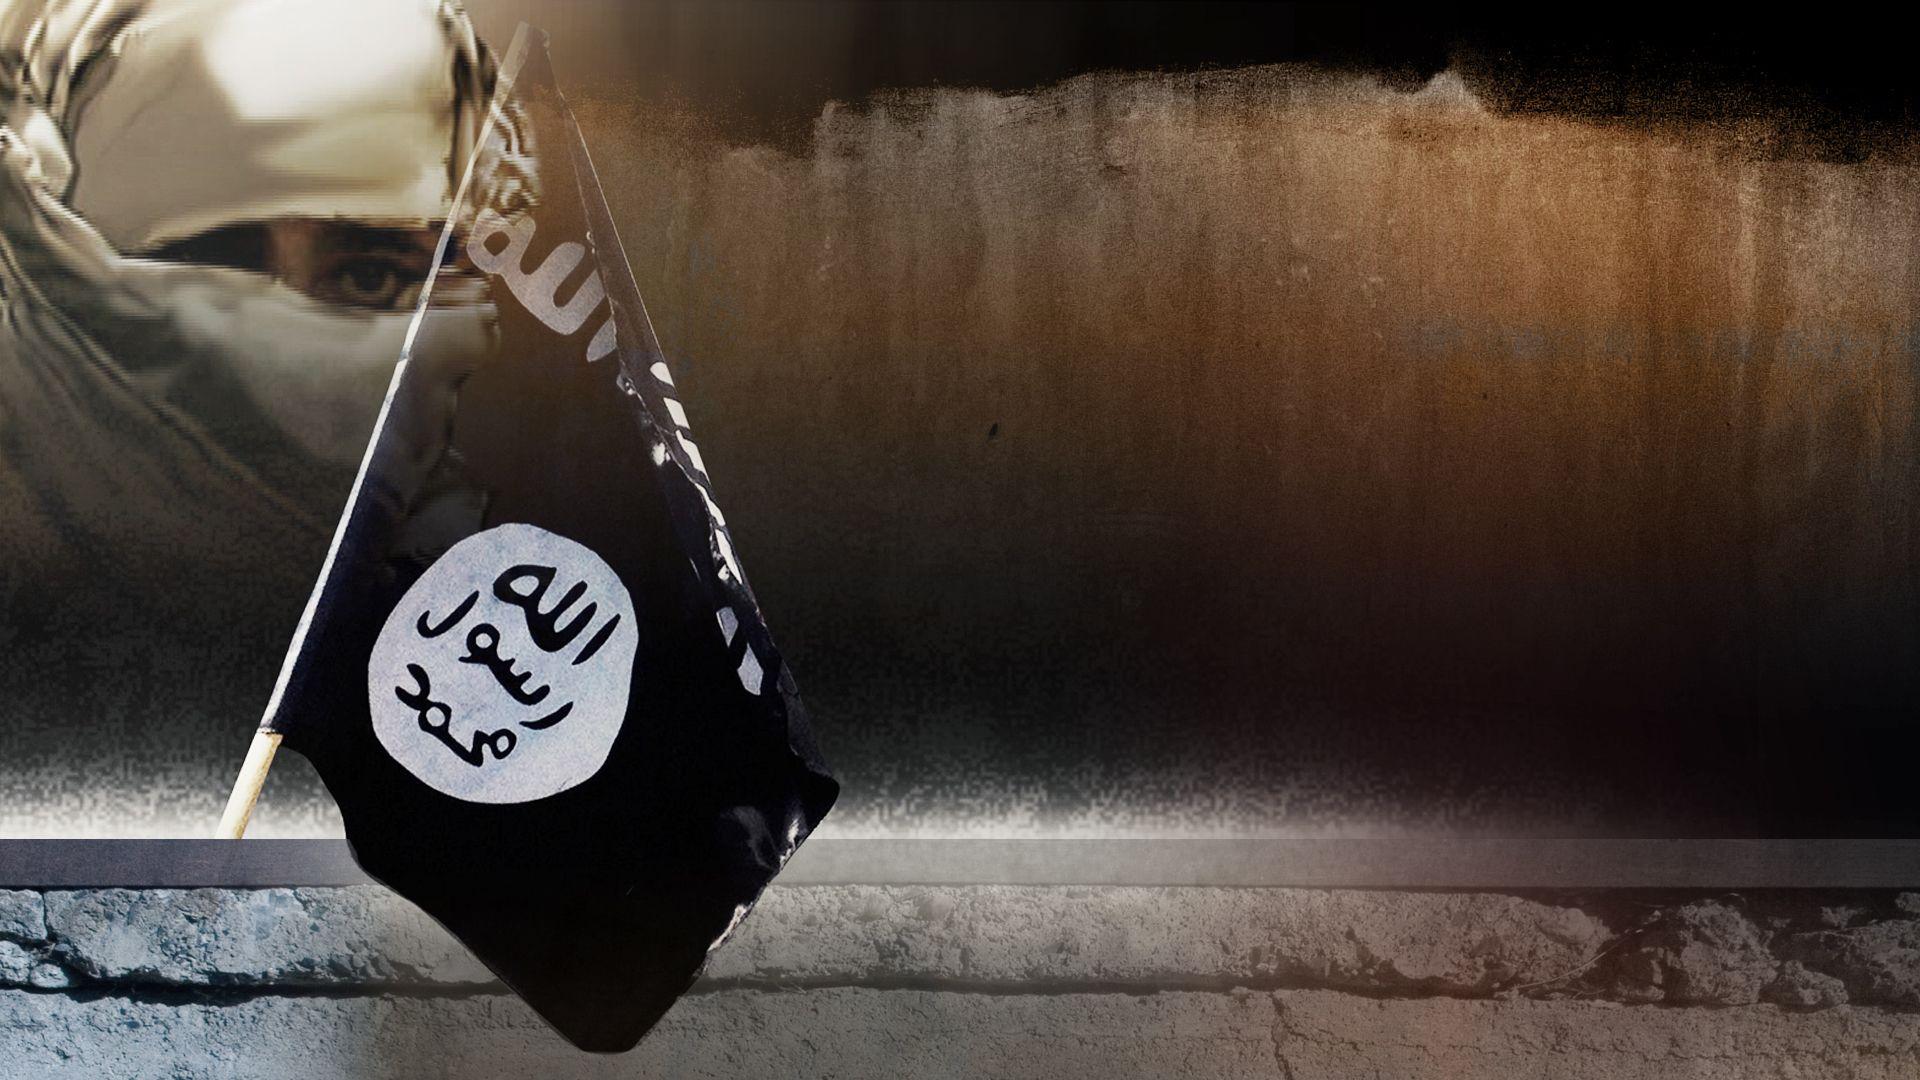 Can the Islamic State group be destroyed?